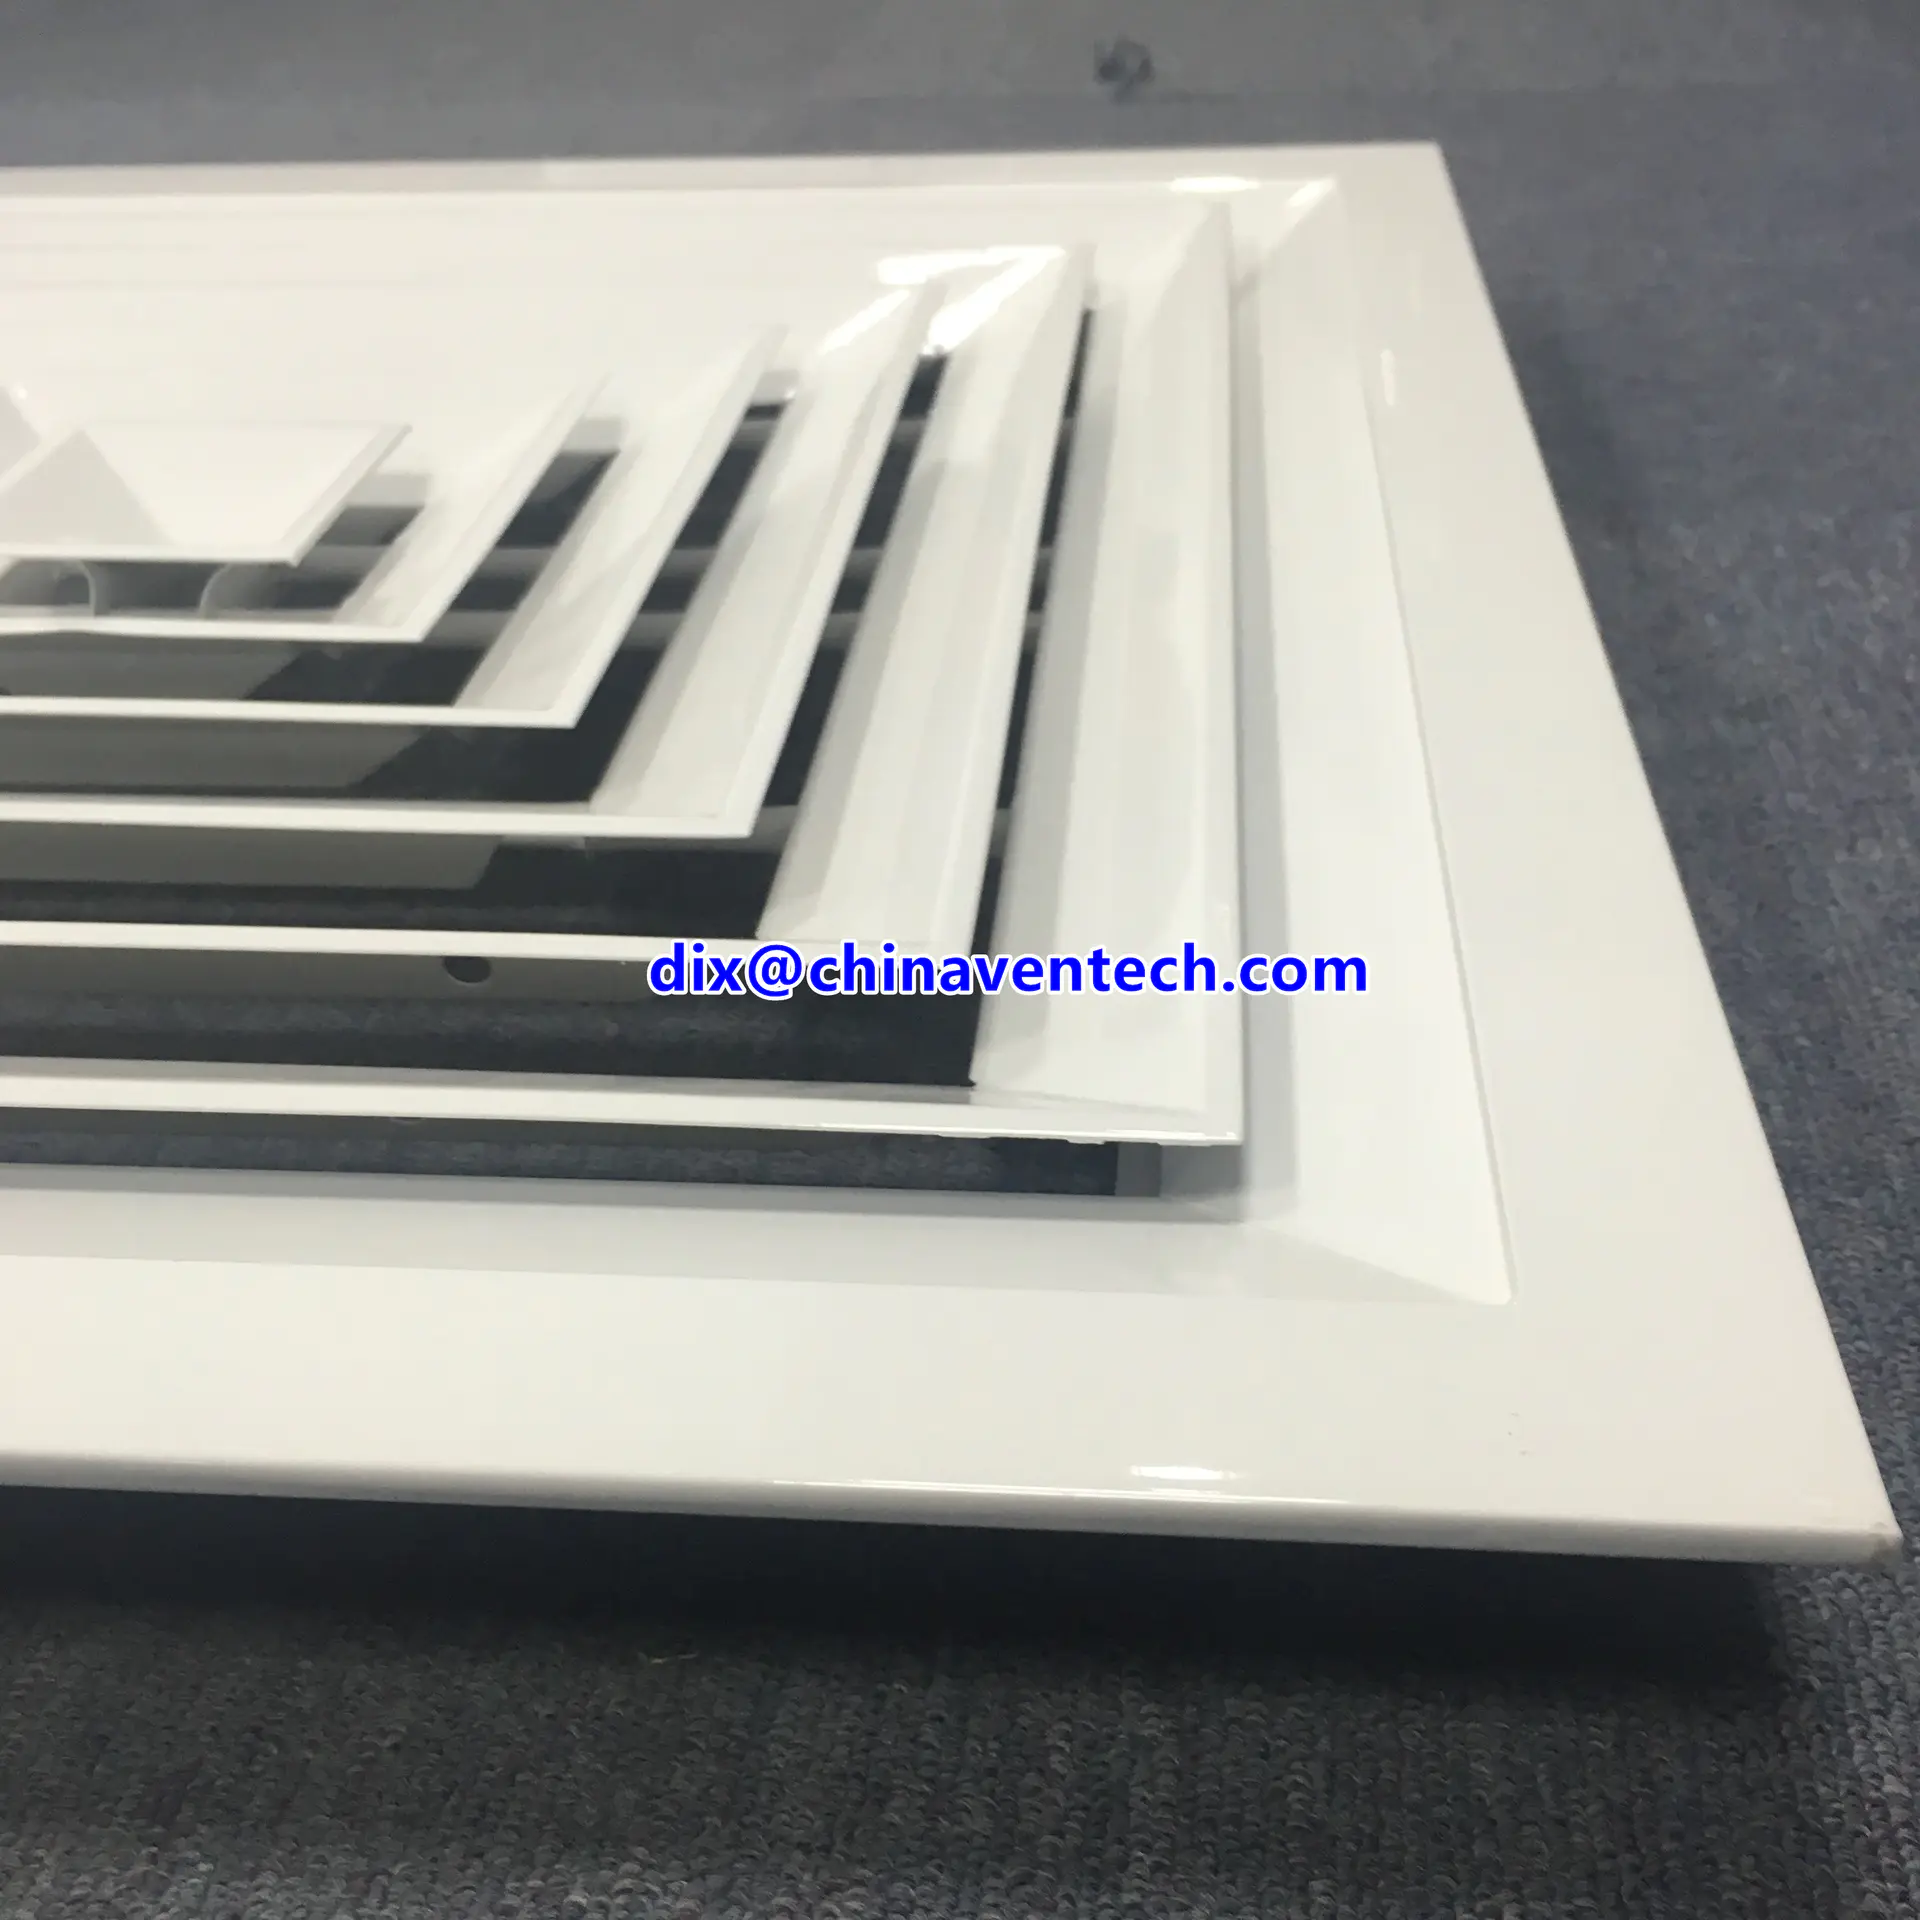 Hvac Square Register Air Grille Diffusers for Air Conditioning Terminals